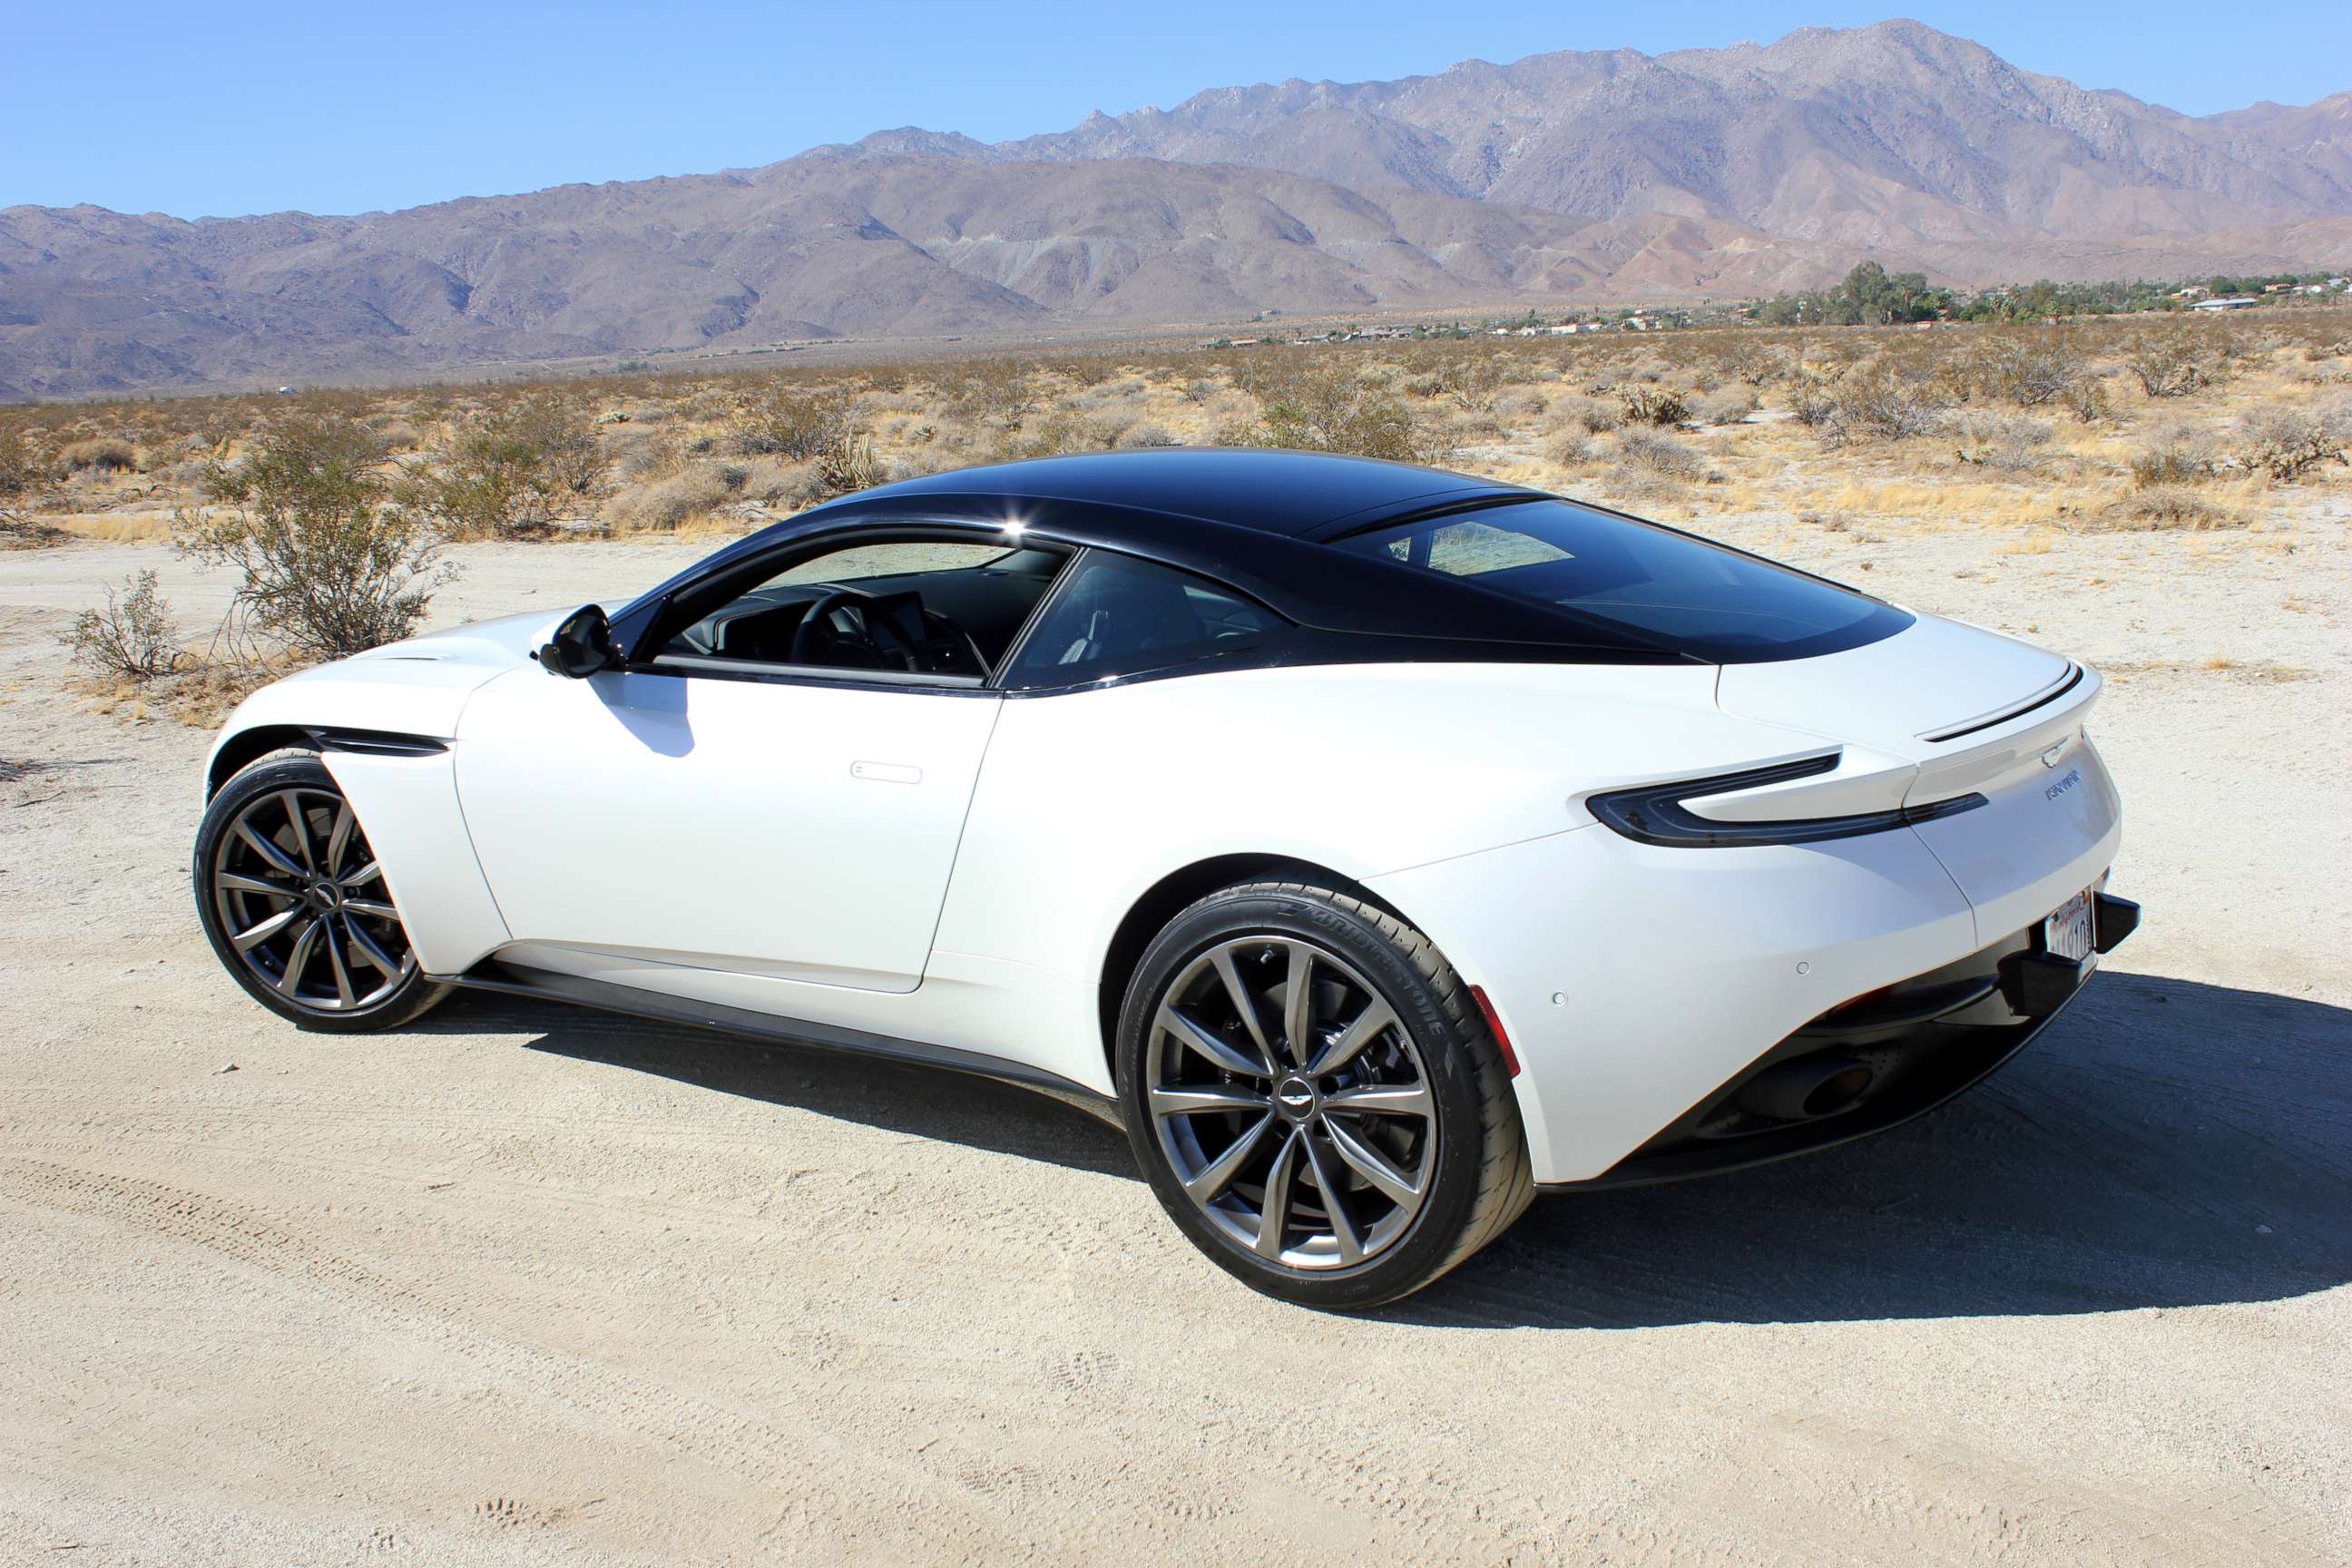 PHOTO: The DB11 V8 has a top speed of 187 mph. It posts 0-62 mph in 4 seconds, according to Aston Martin. 